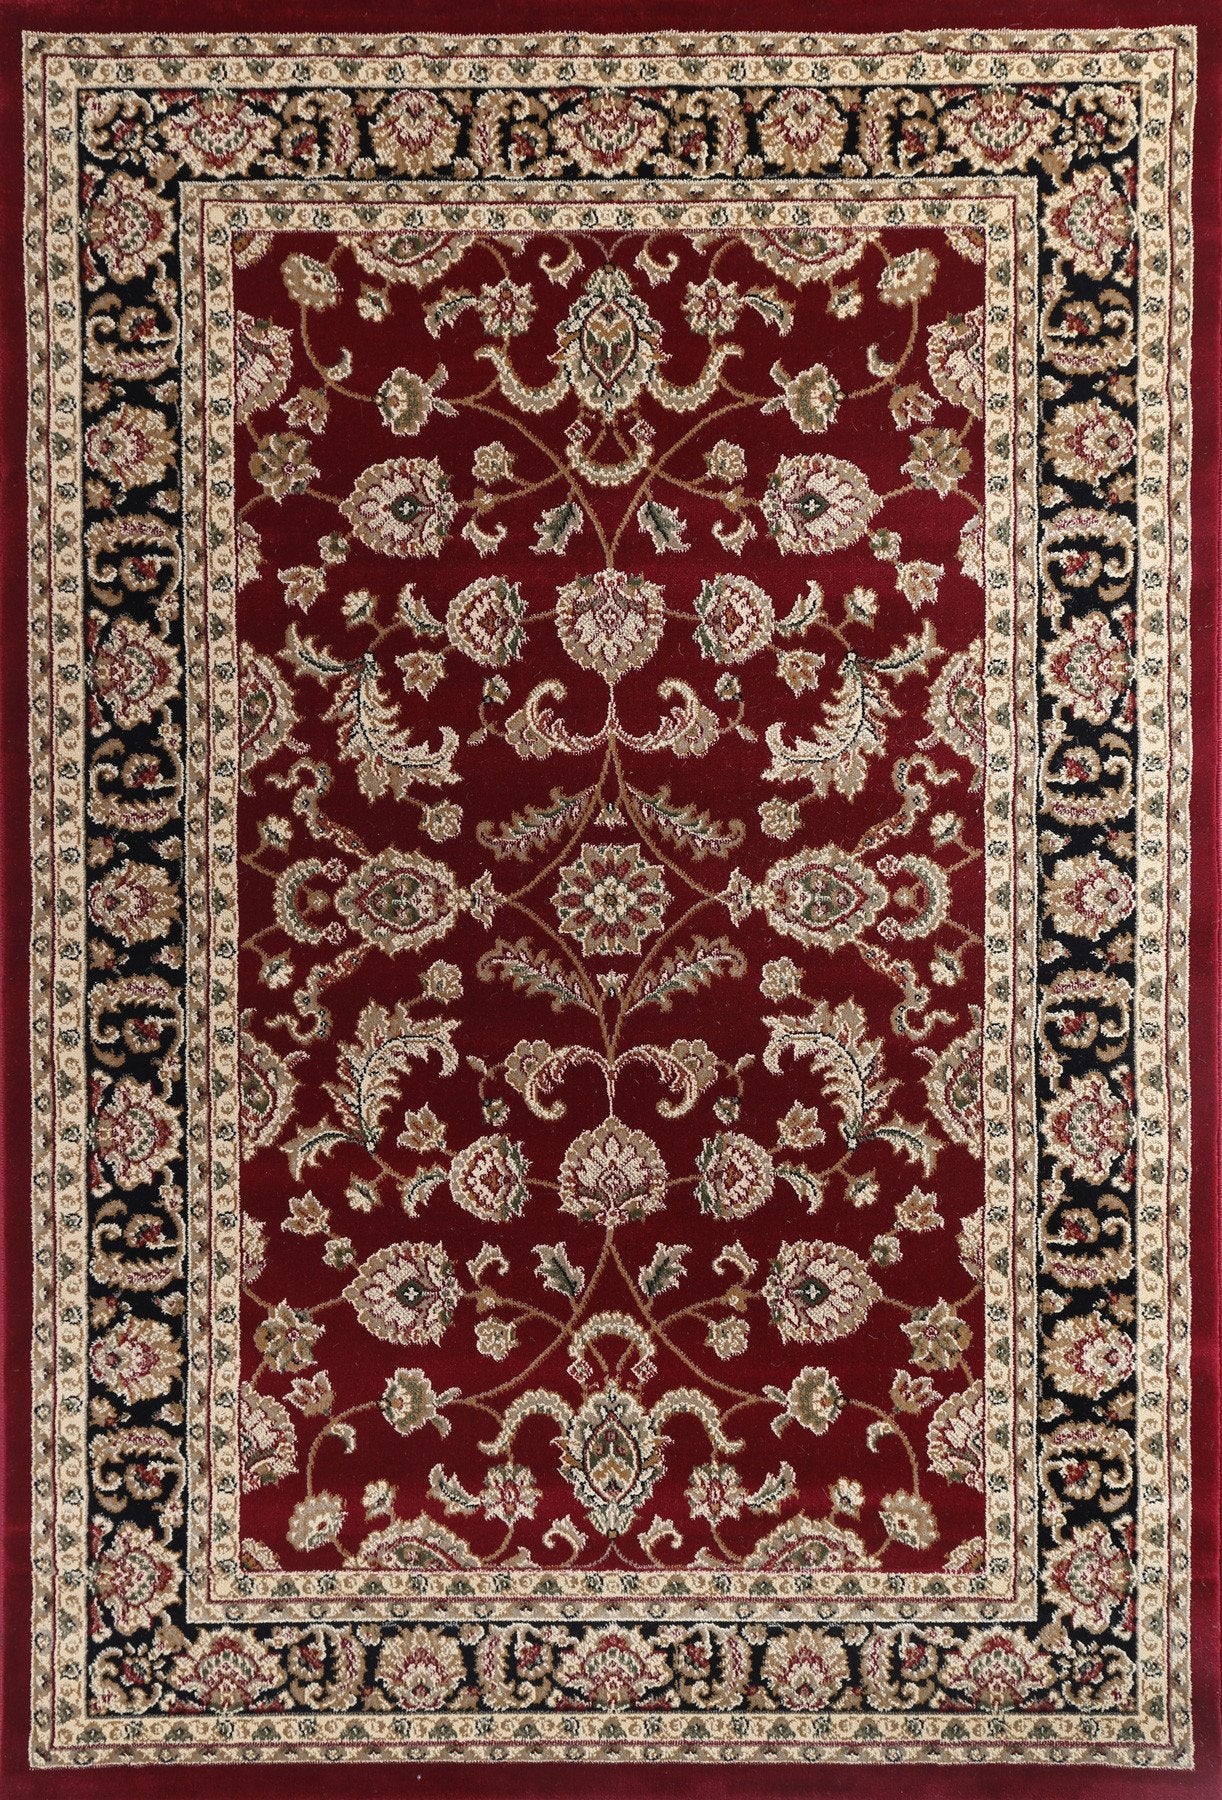 Julian Ornate Red and Black Traditional Bordered Ikat Rug